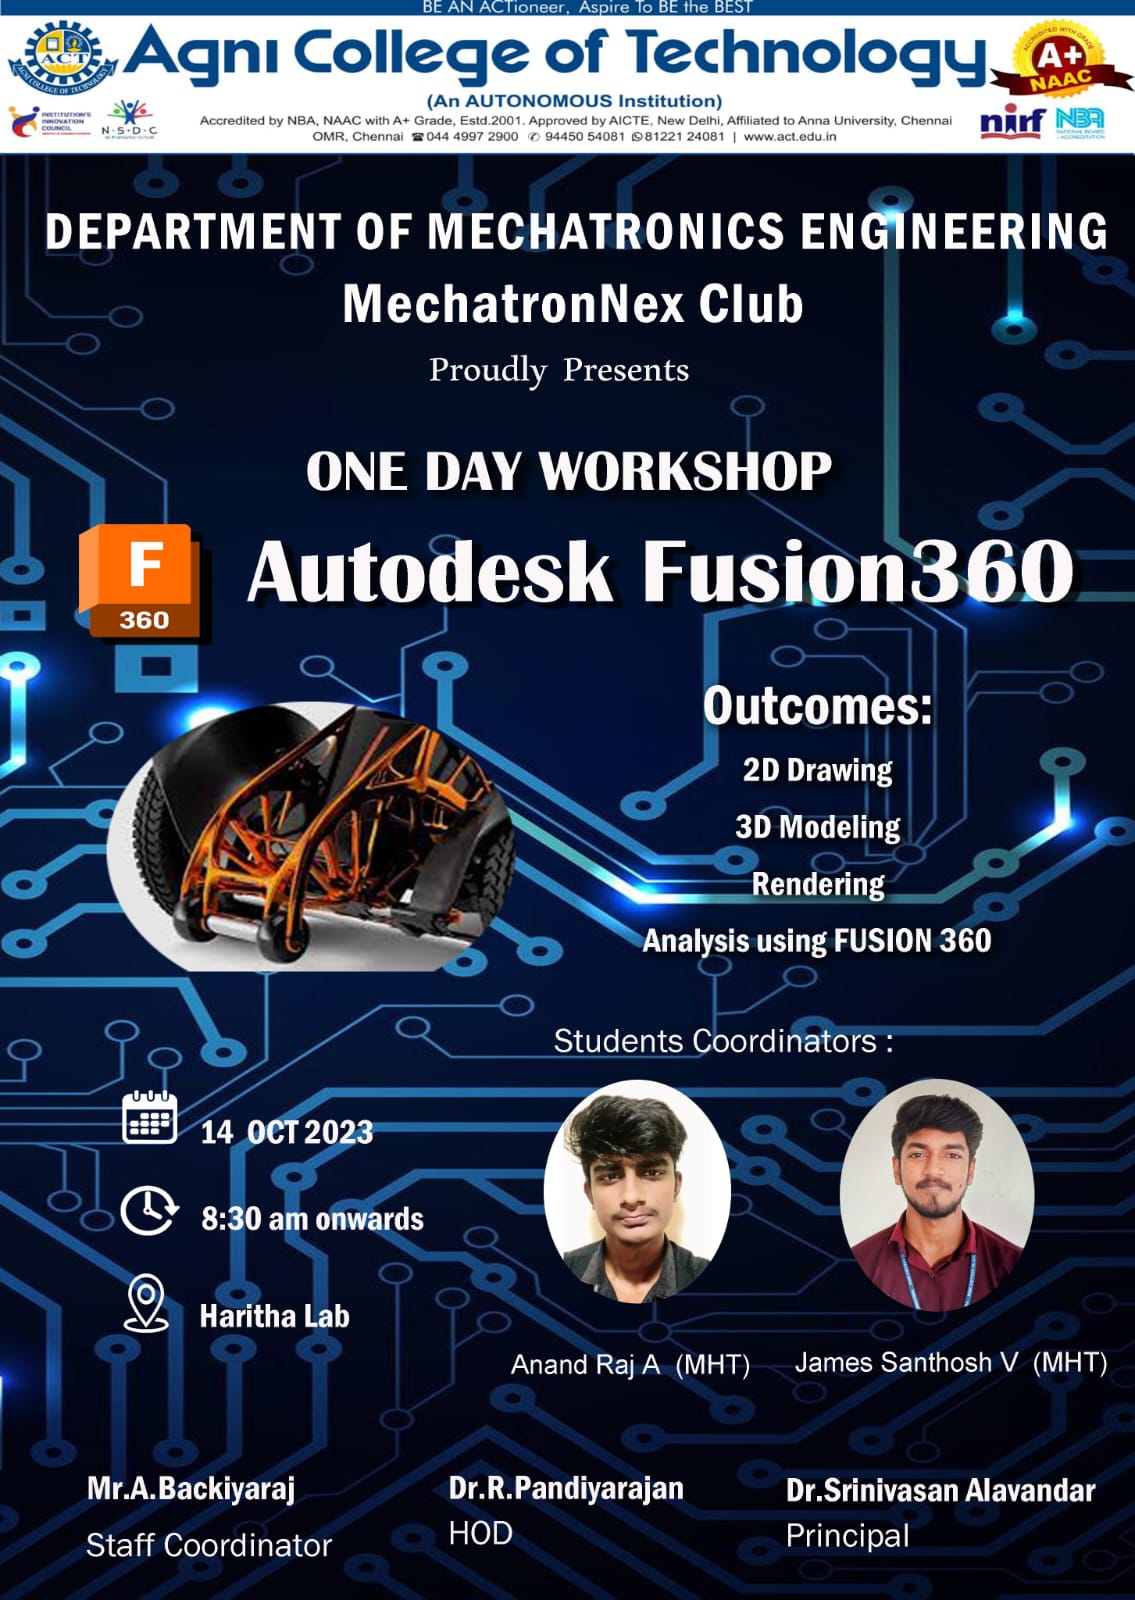 One Day Workshop on Autodesk Fusion360